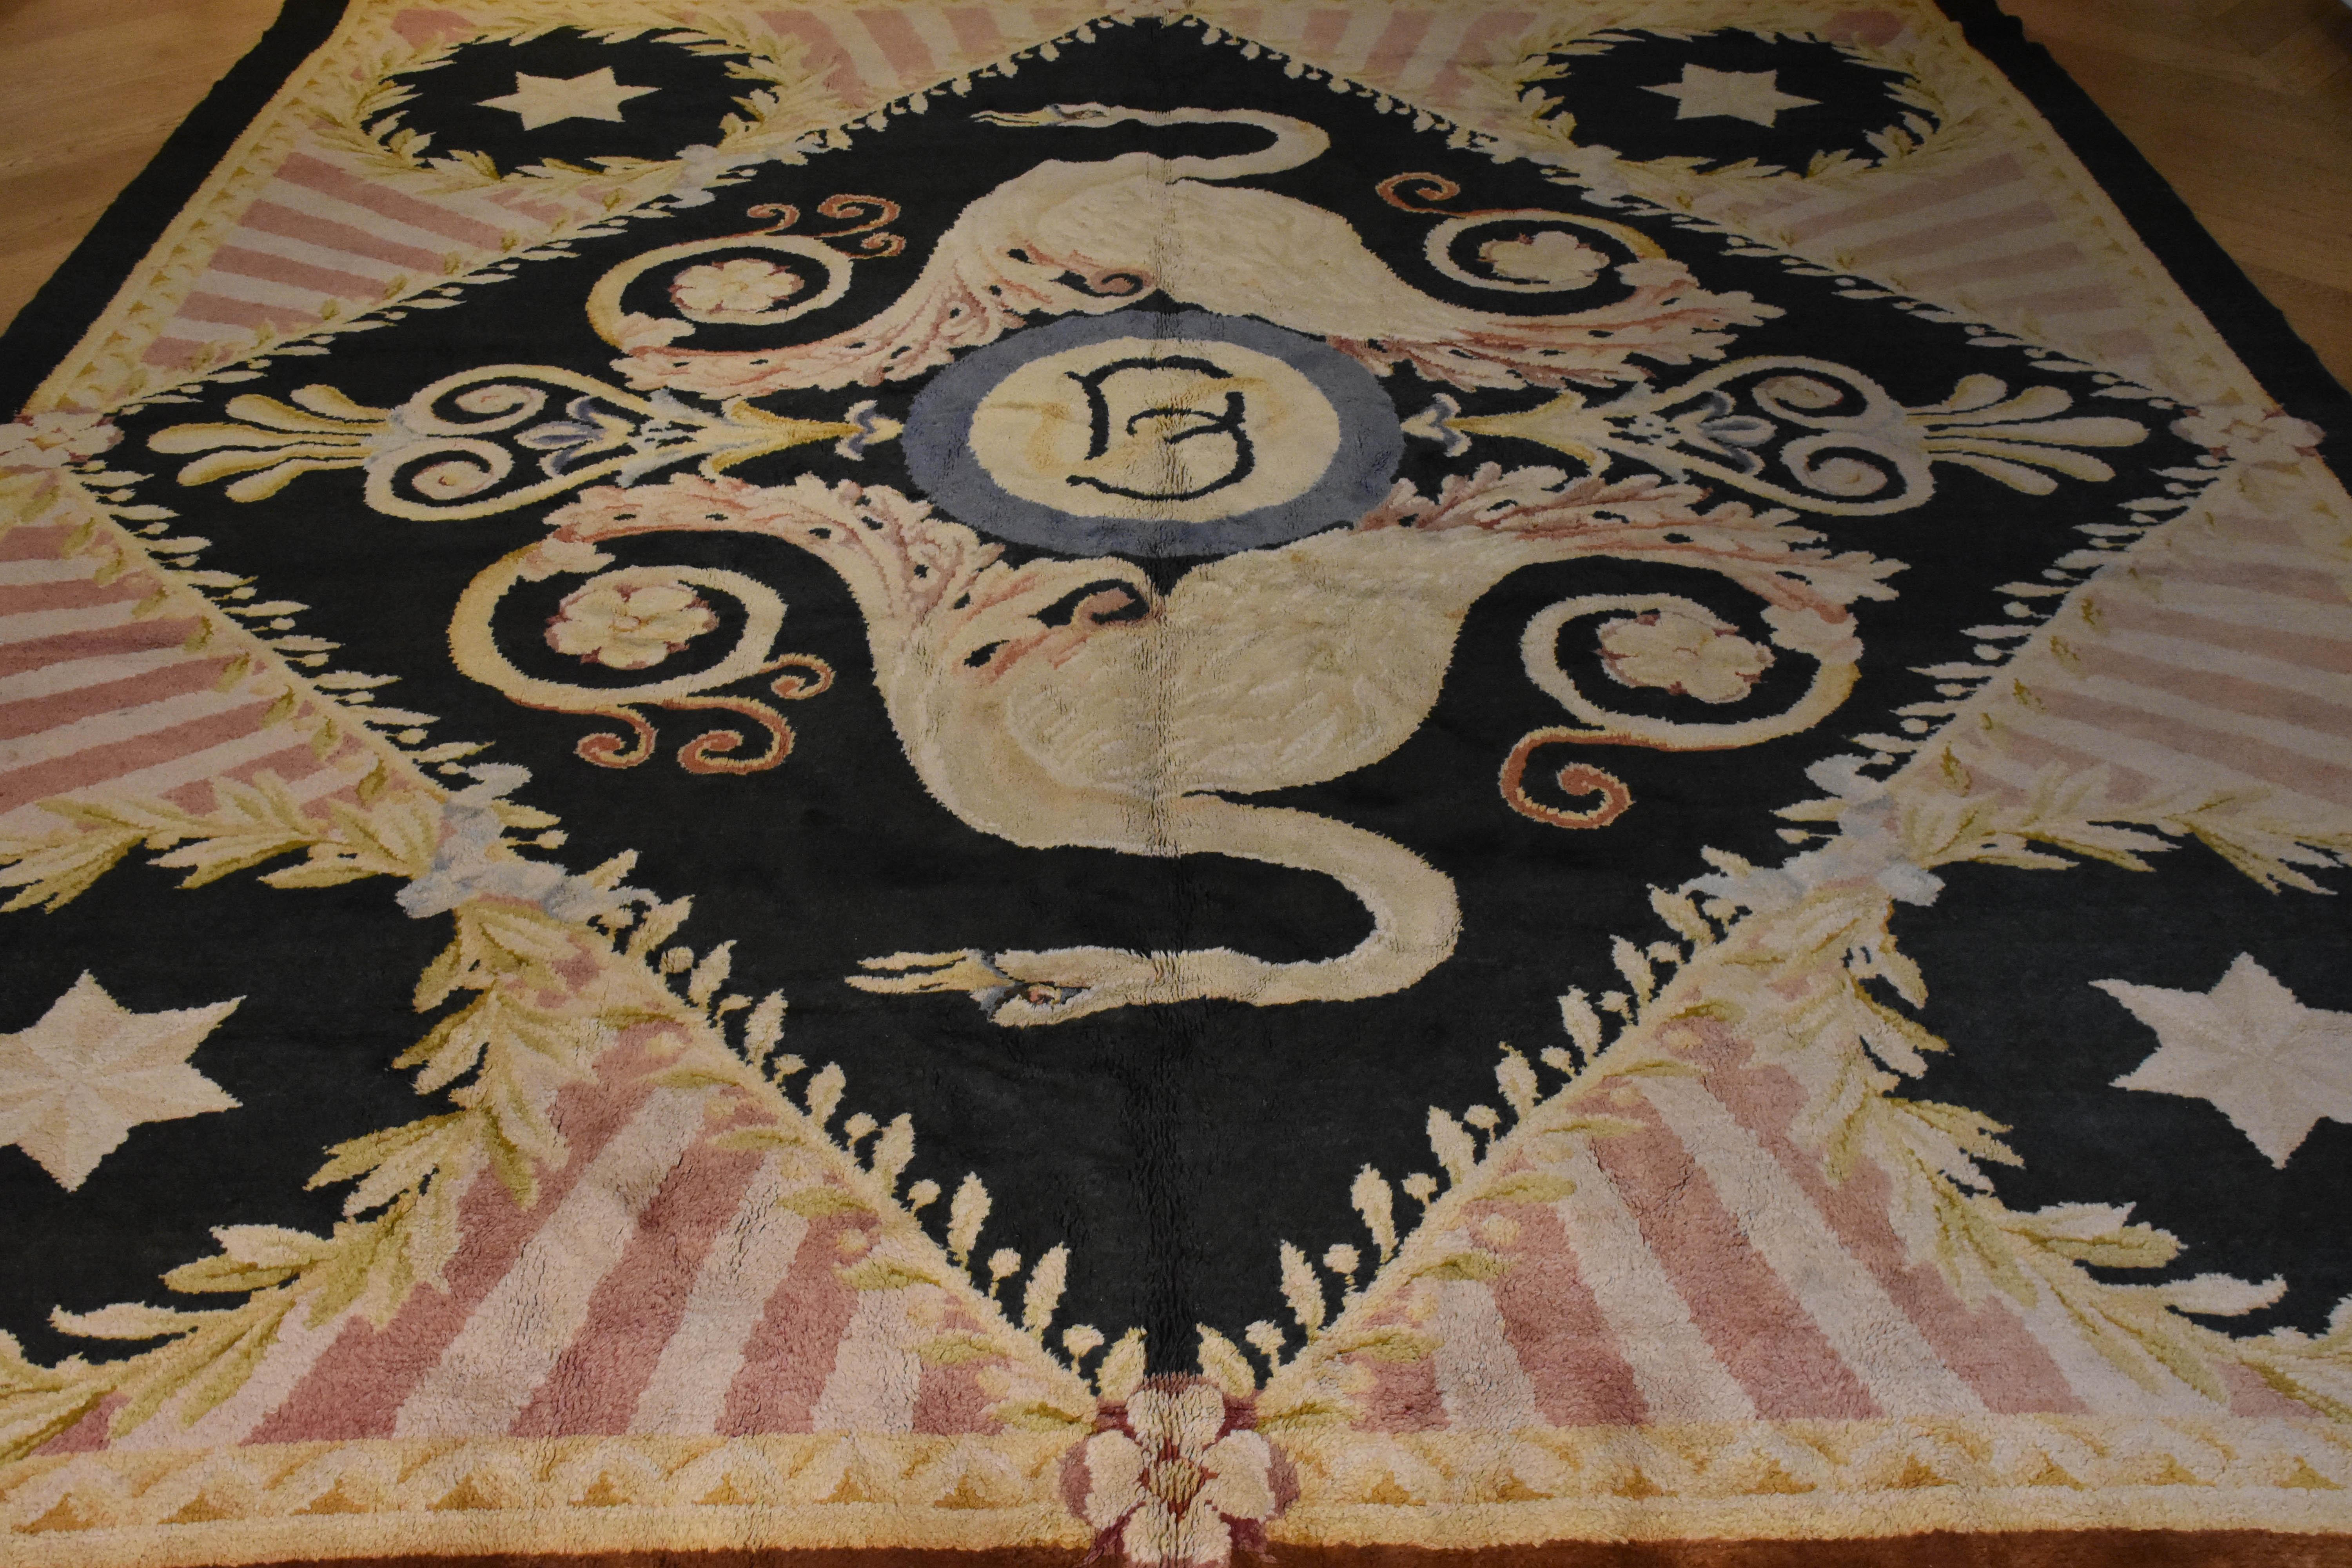 Important carpet produced in the Real Manifattura of Madrid (Real Fabrica De Alfombras), coming from the famous Toms collection.

Reginald Toms (1892-1978) made his fortune in the real estate sector, first in London and then in South Africa. In